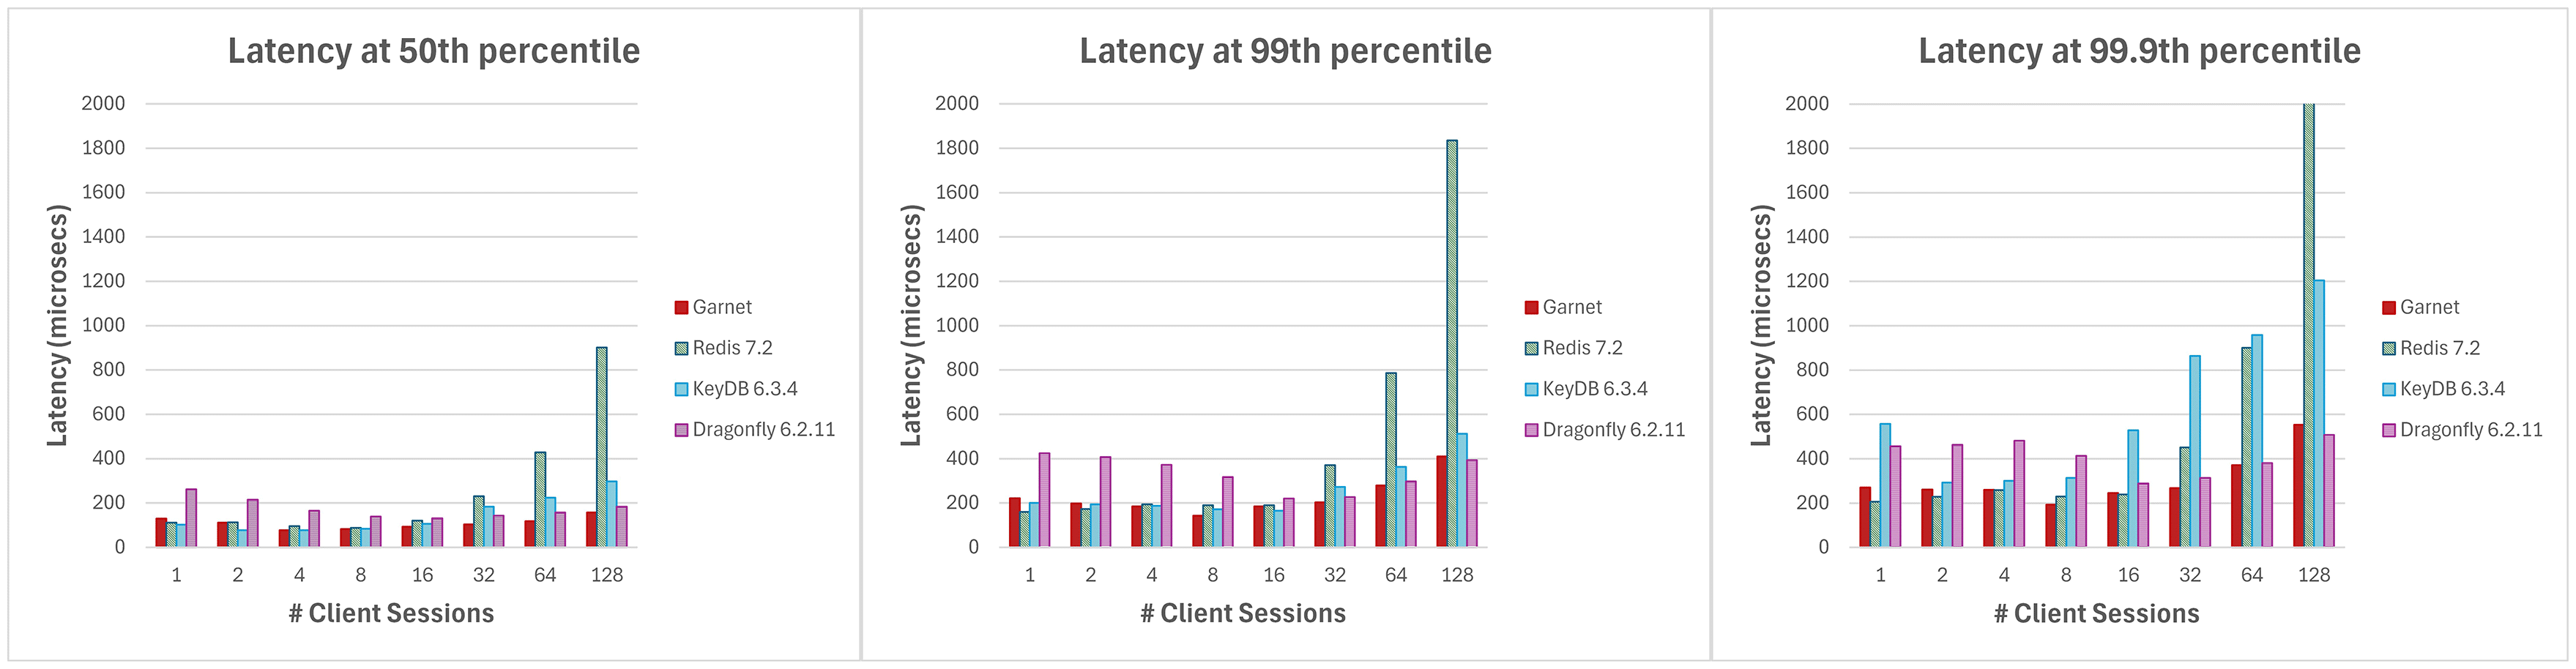 Three clustered column bar graphs comparing the latency of various systems (Garnet, Redis, KeyDB, and Dragonfly) at median, 99th percentile, and 99.9th percentile respectively. The x-axis varies the number of client sessions from 1 to 128, with no batching, and an operation mix of 80% GET and 20% SET. Garnet’s latency is shown to be stable and generally lower across the board.